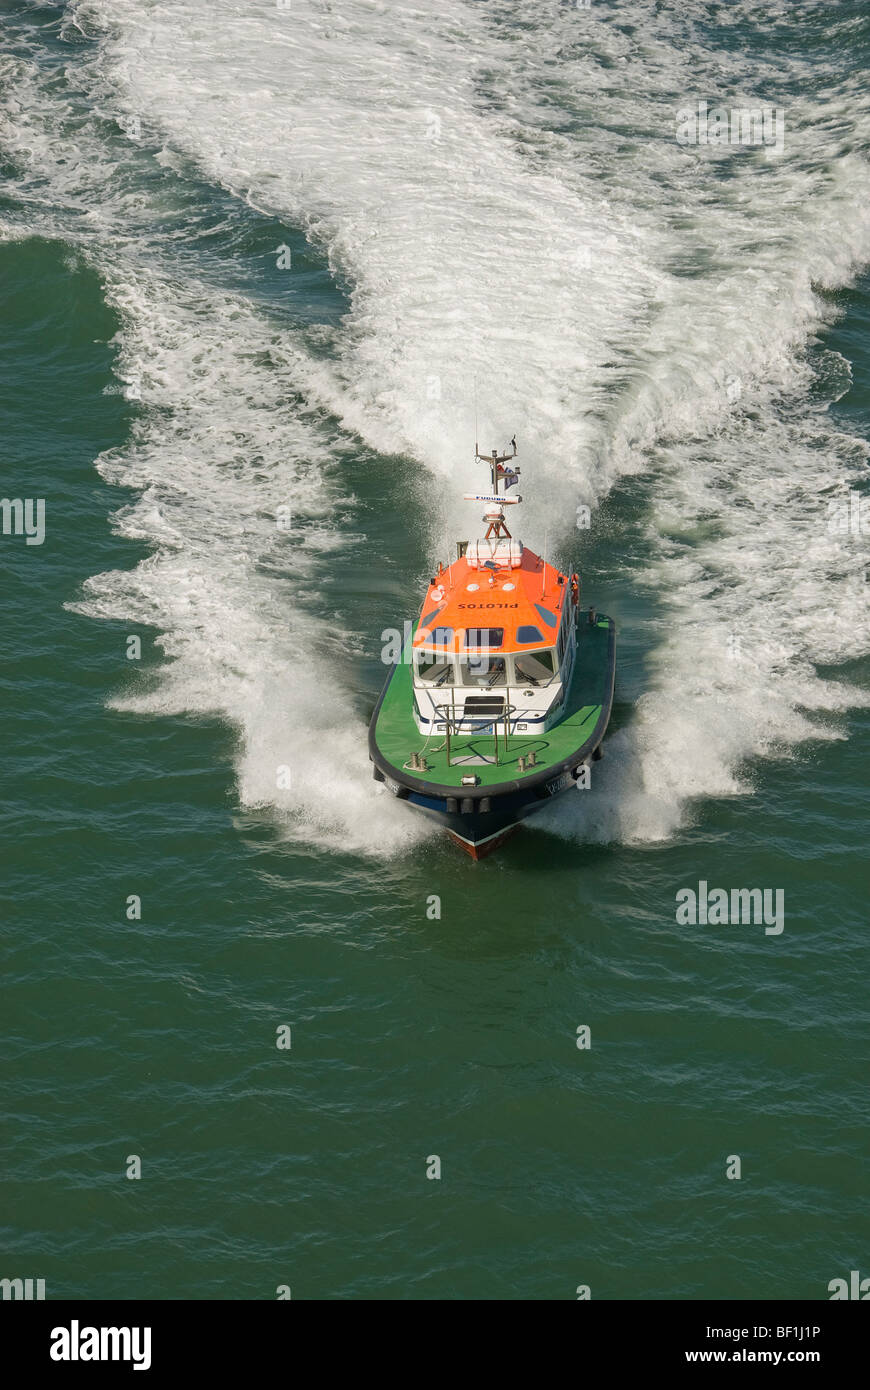 River Tagus pilot vessel at speed Stock Photo